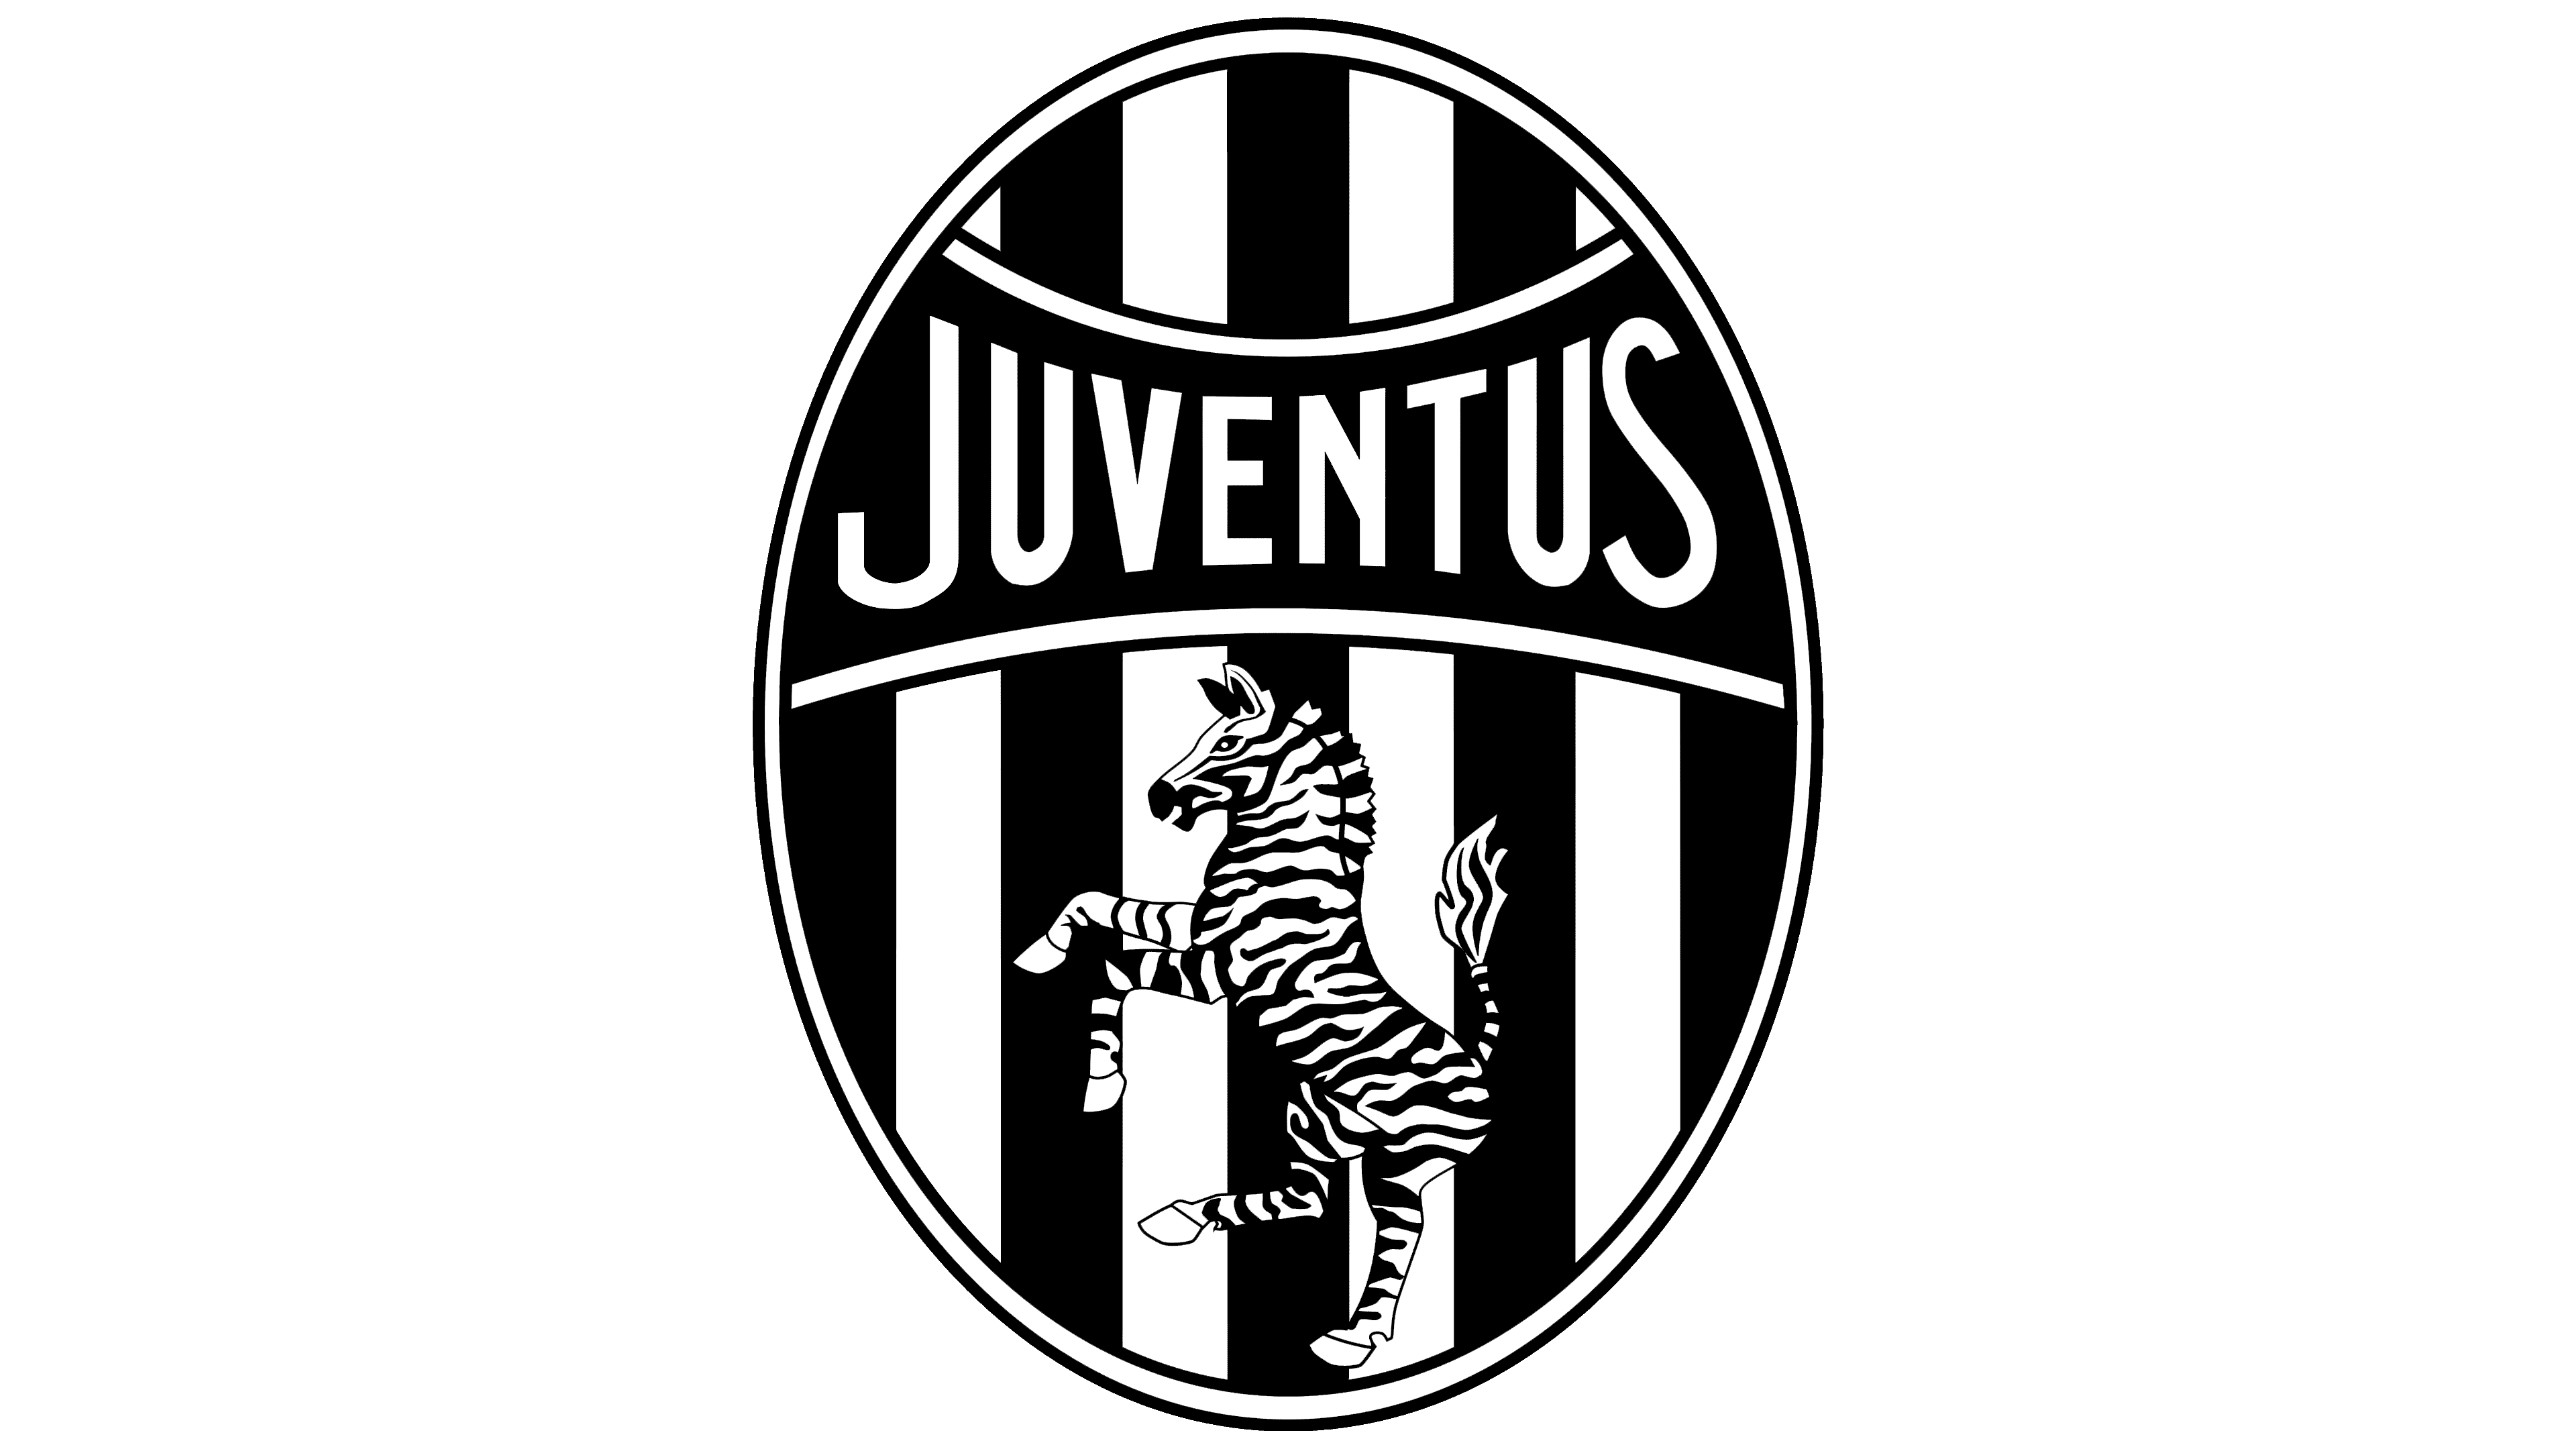 Juventus Logo The Most Famous Brands And Company Logos In The World